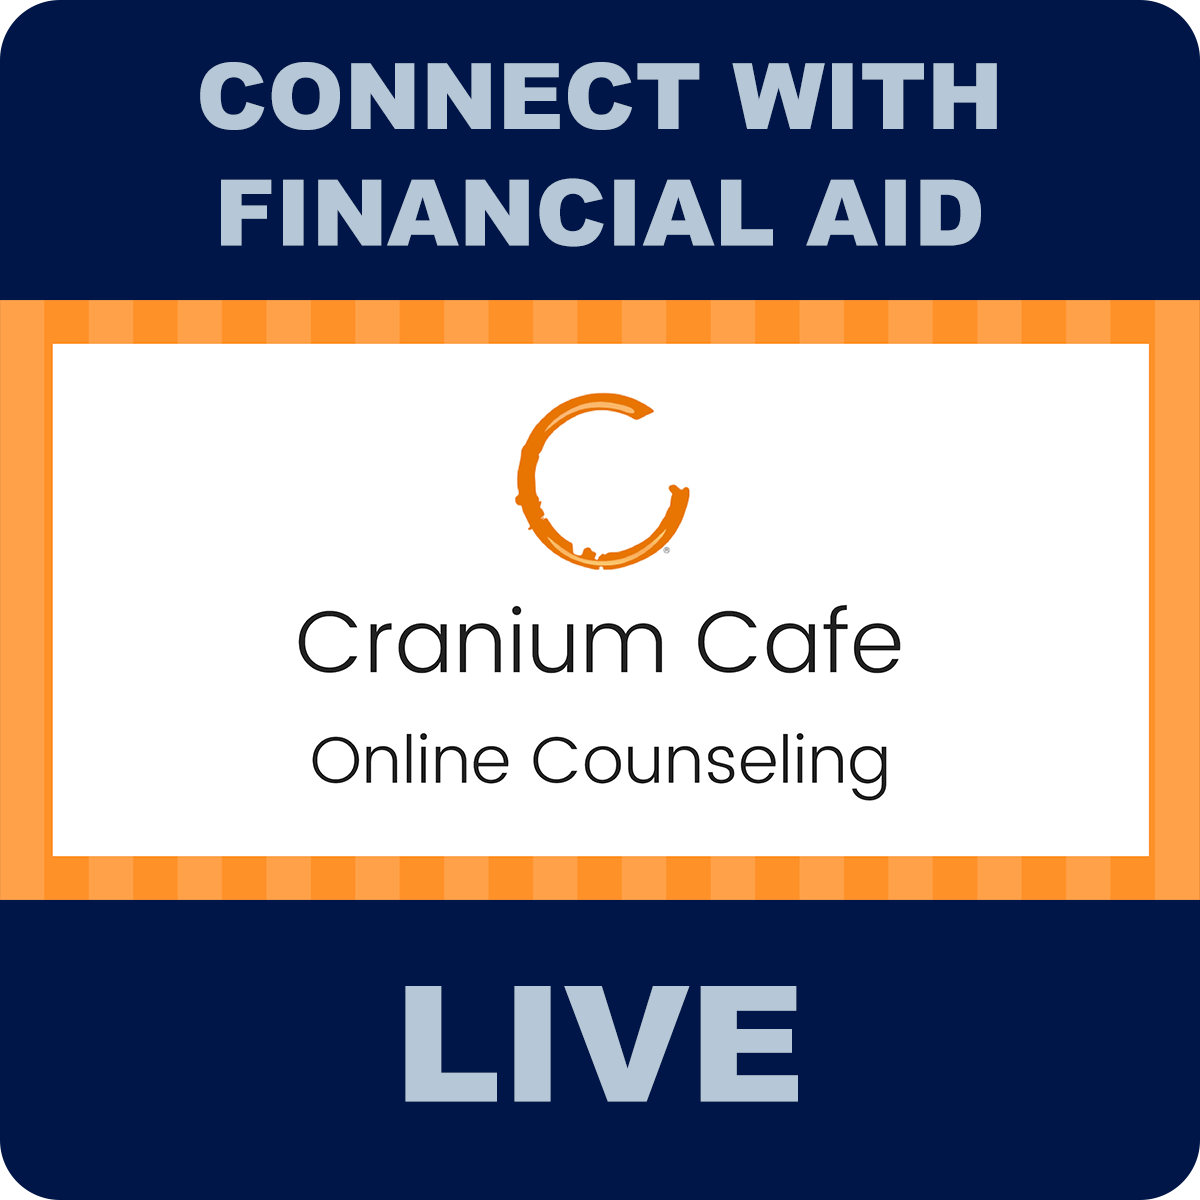 Connect with Financial Aid Live